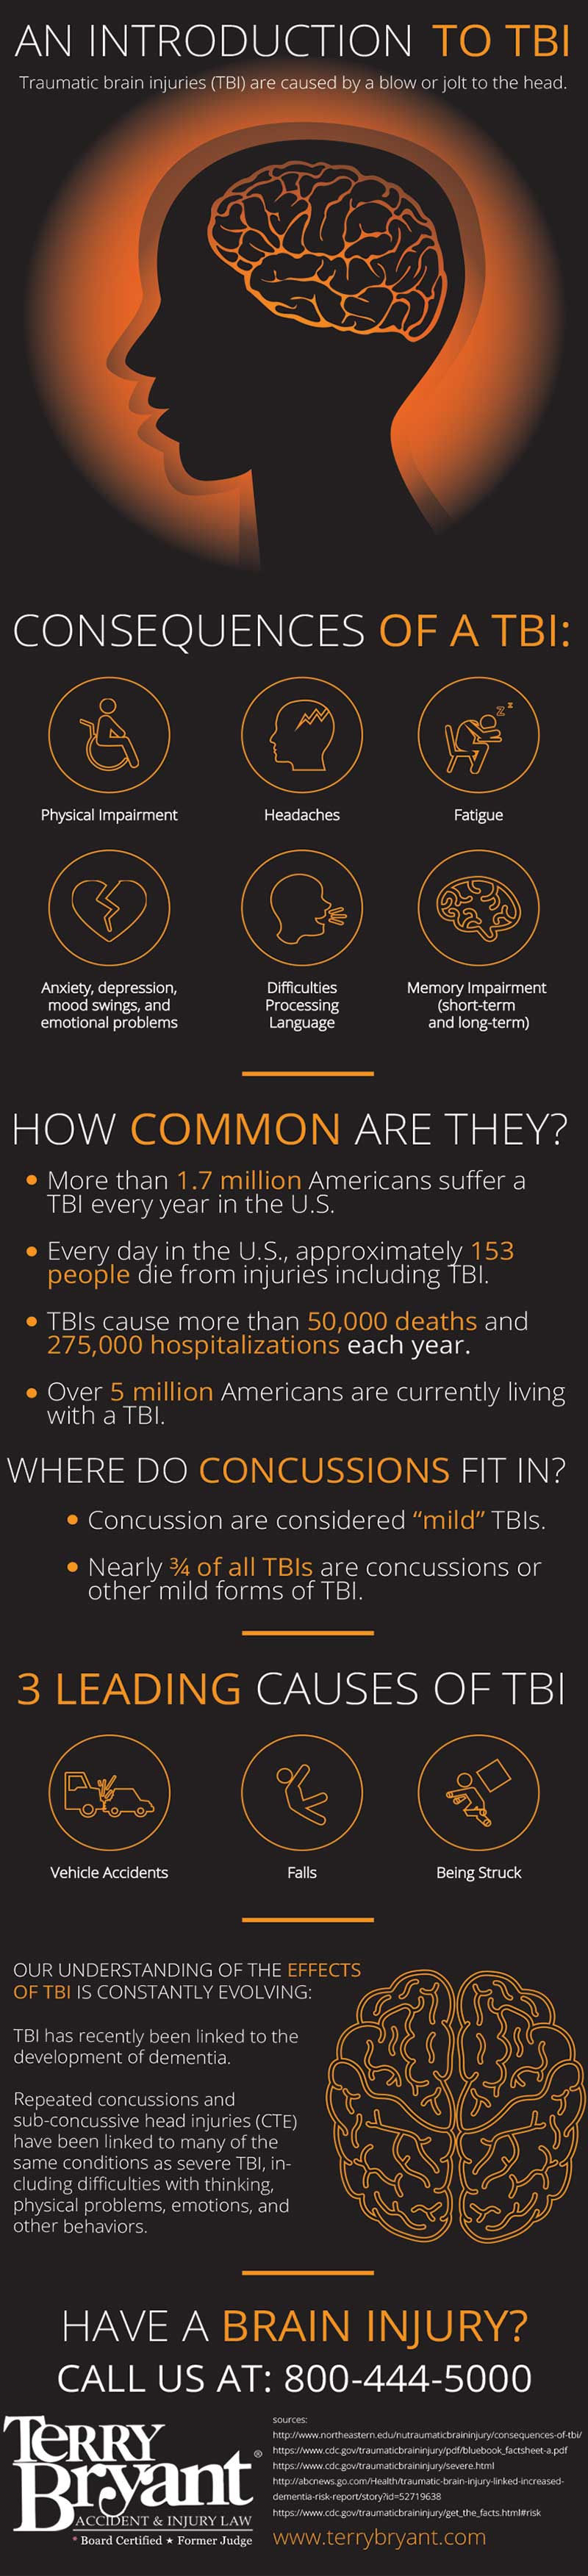 An Introduction To TBI